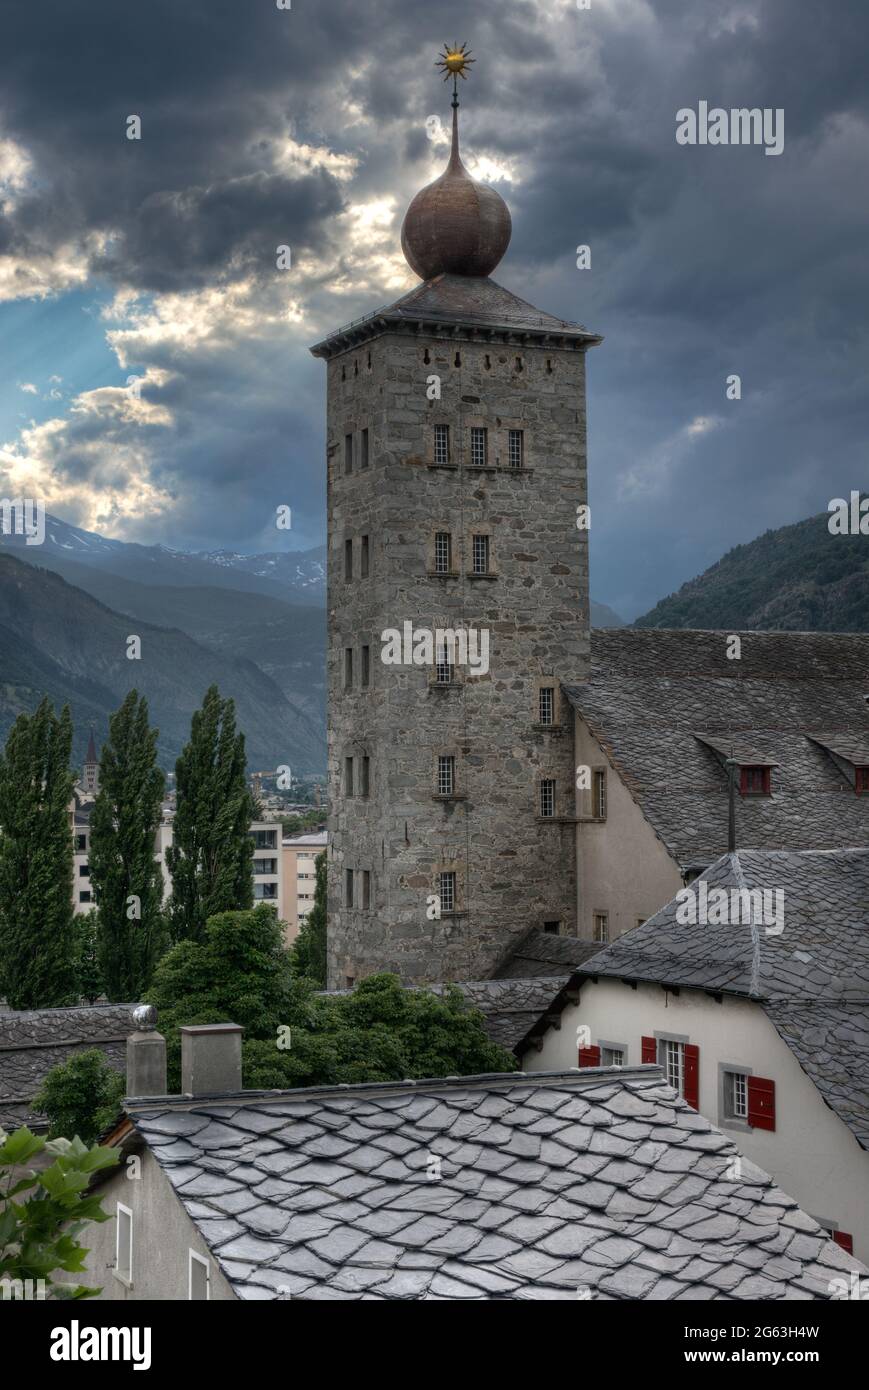 Tower of the Stockalper Palace in Brig, Switzerland, in the background mountains and dark, threatening clouds Stock Photo